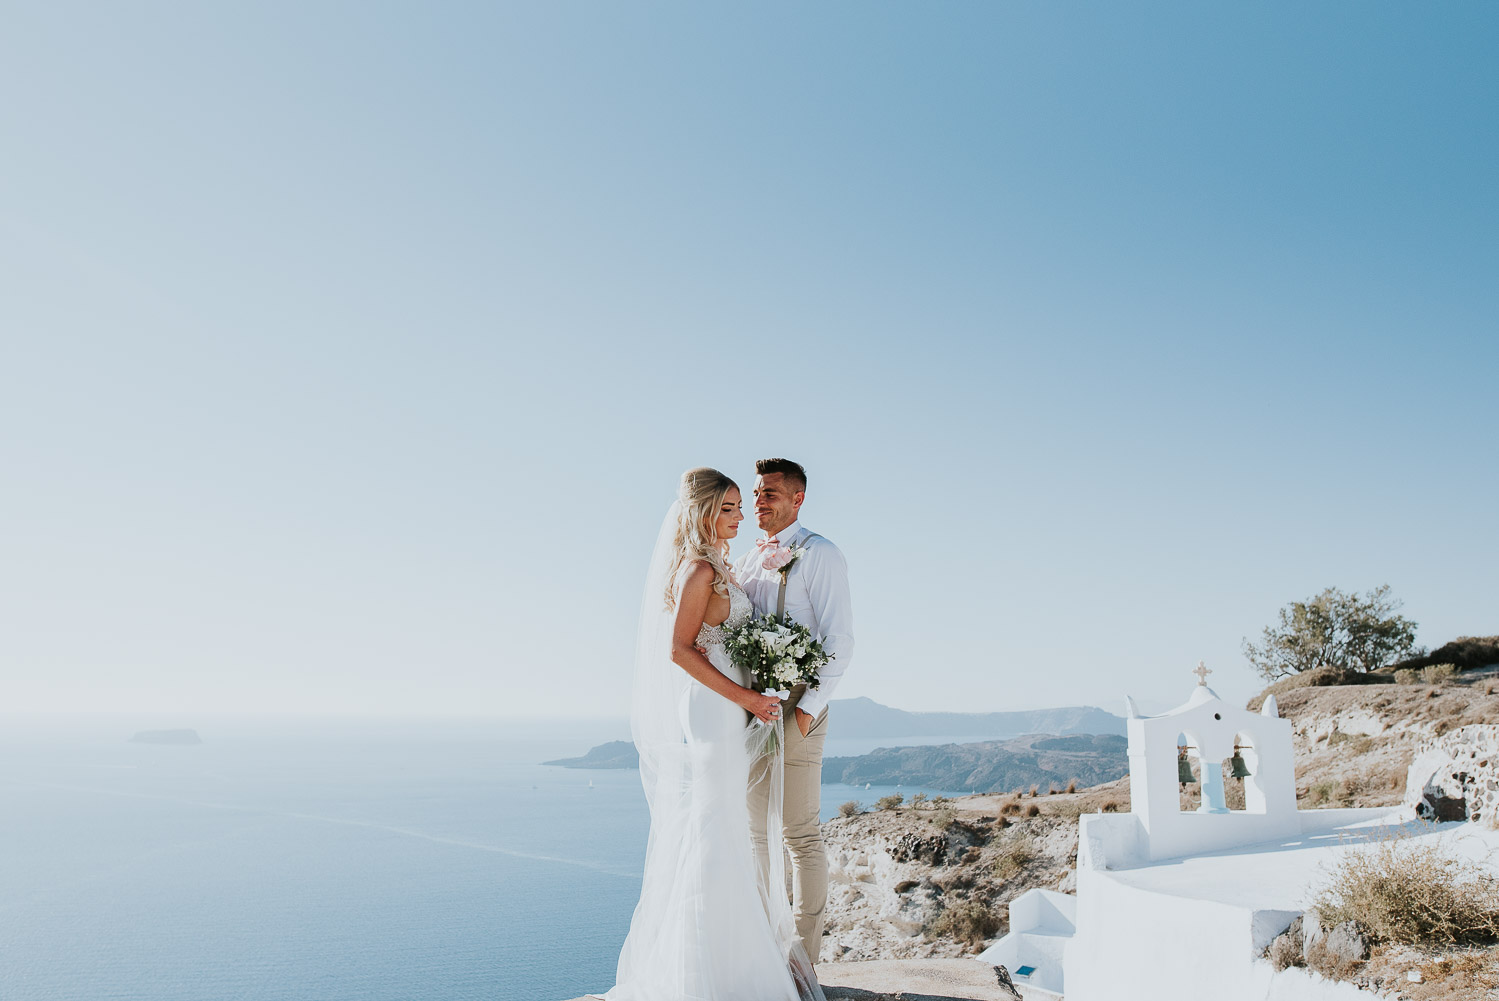 Wedding photographer Santorini: panoramic photo of bride and groom with the sea, sky and the church in the background by Ben and Vesna.